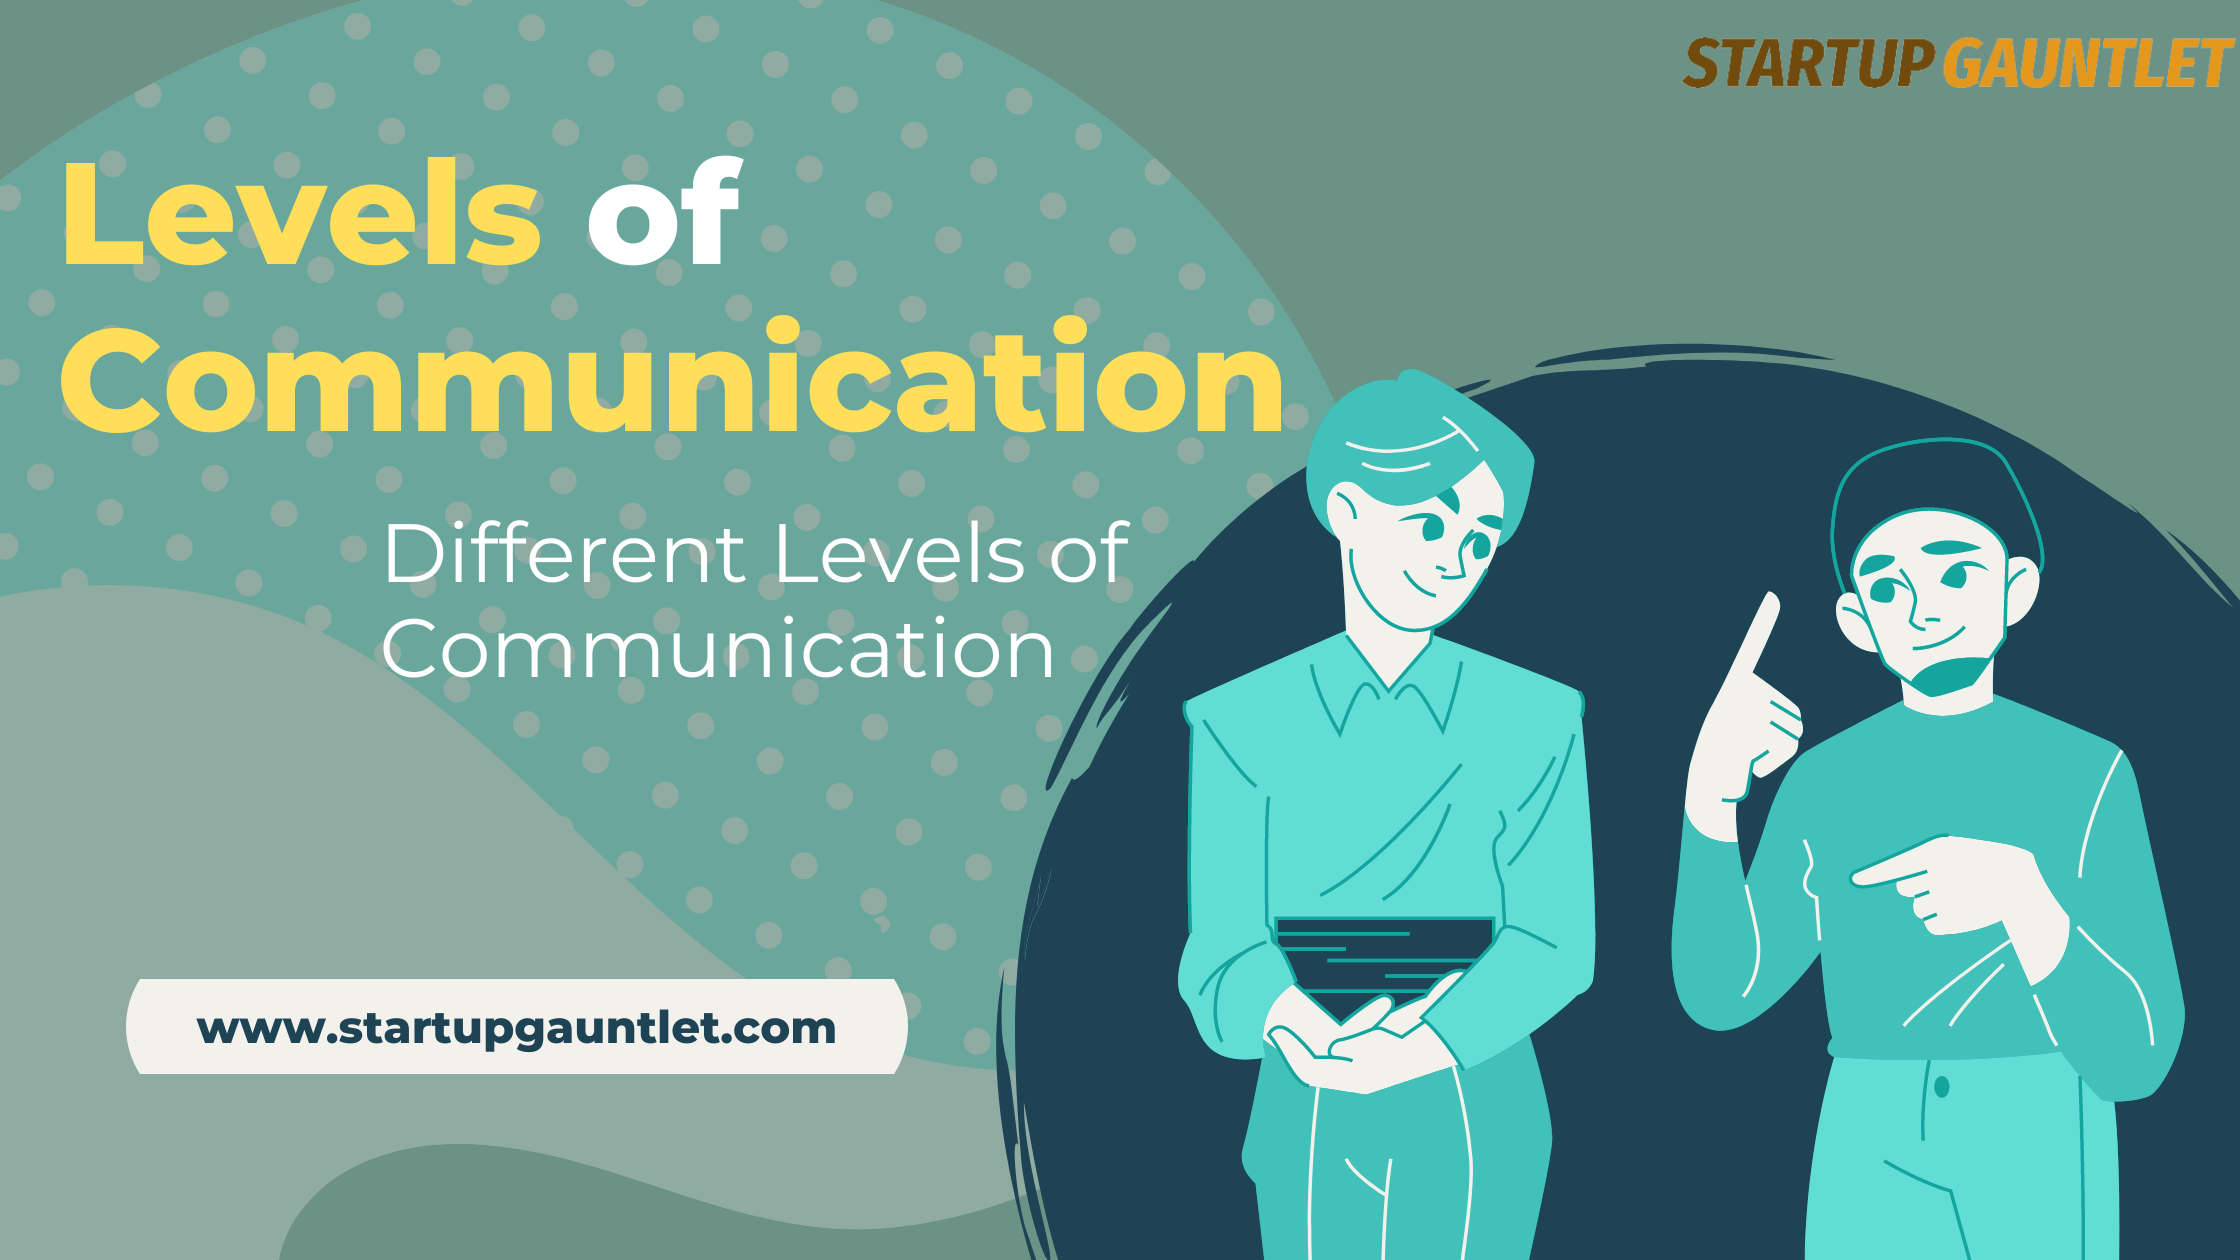 What are the 4 levels of communication?